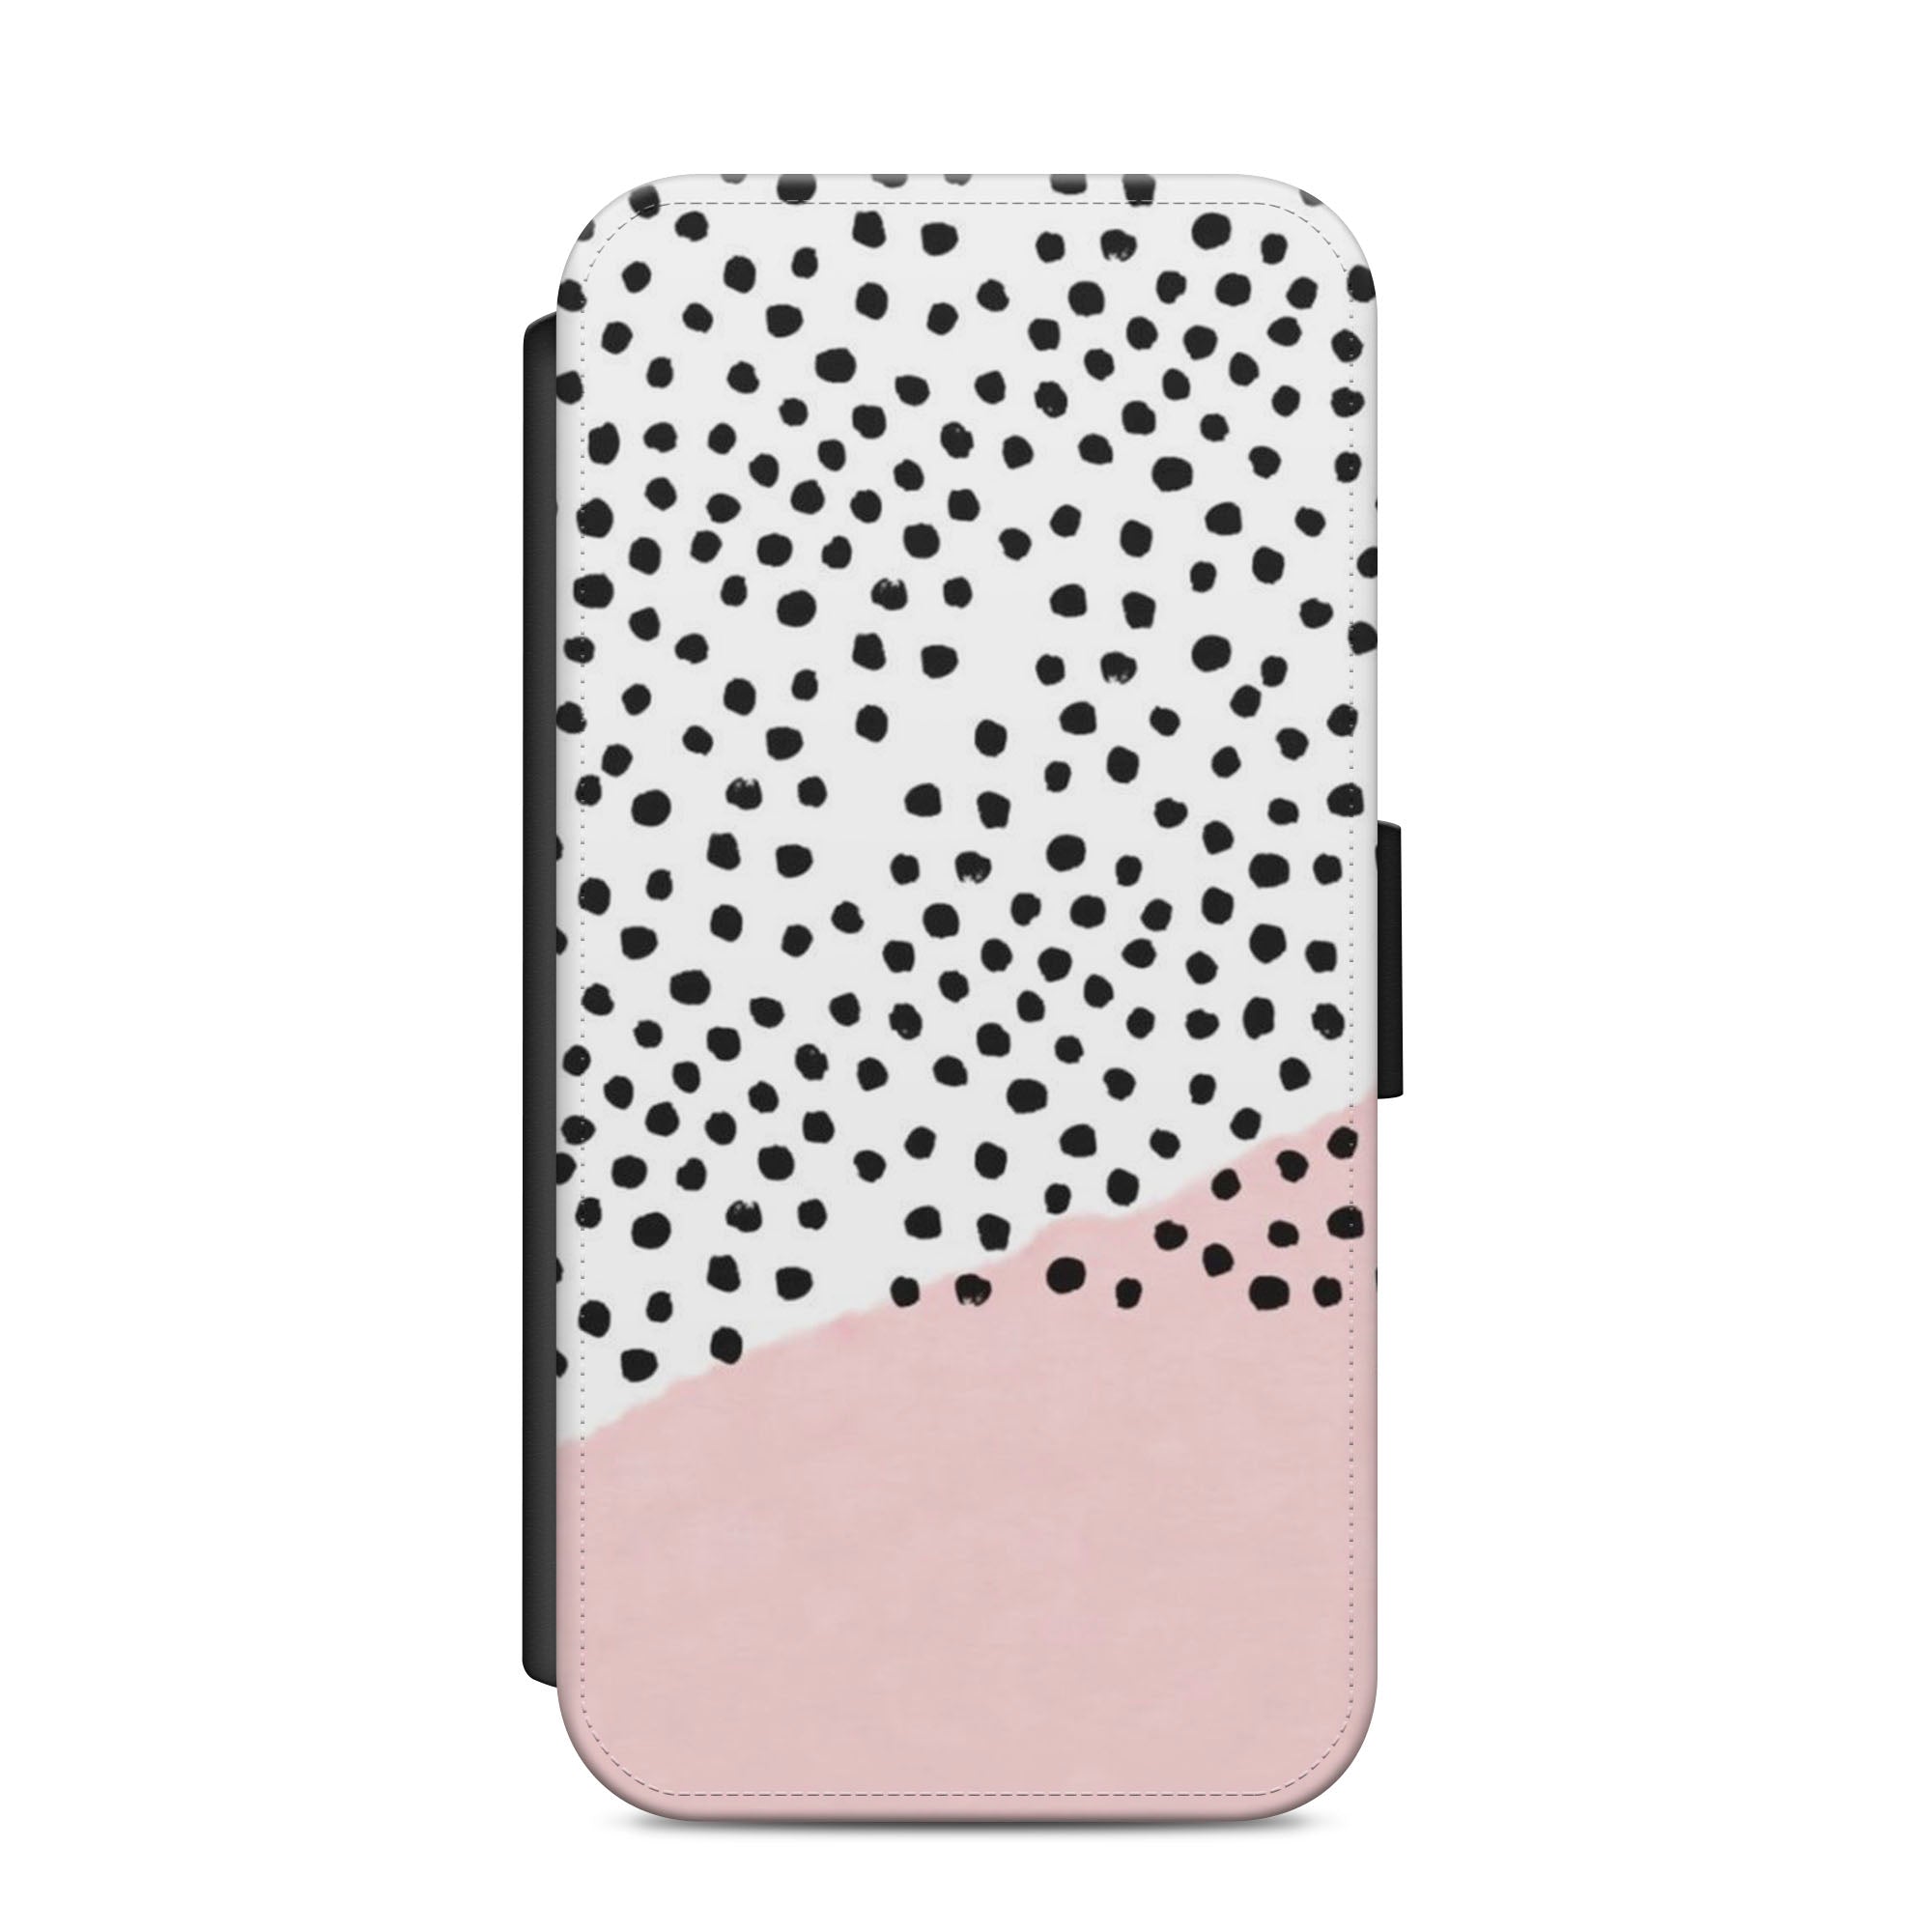 Pastel Pink Dots Pattern Faux Leather Flip Case Wallet for iPhone / Samsung